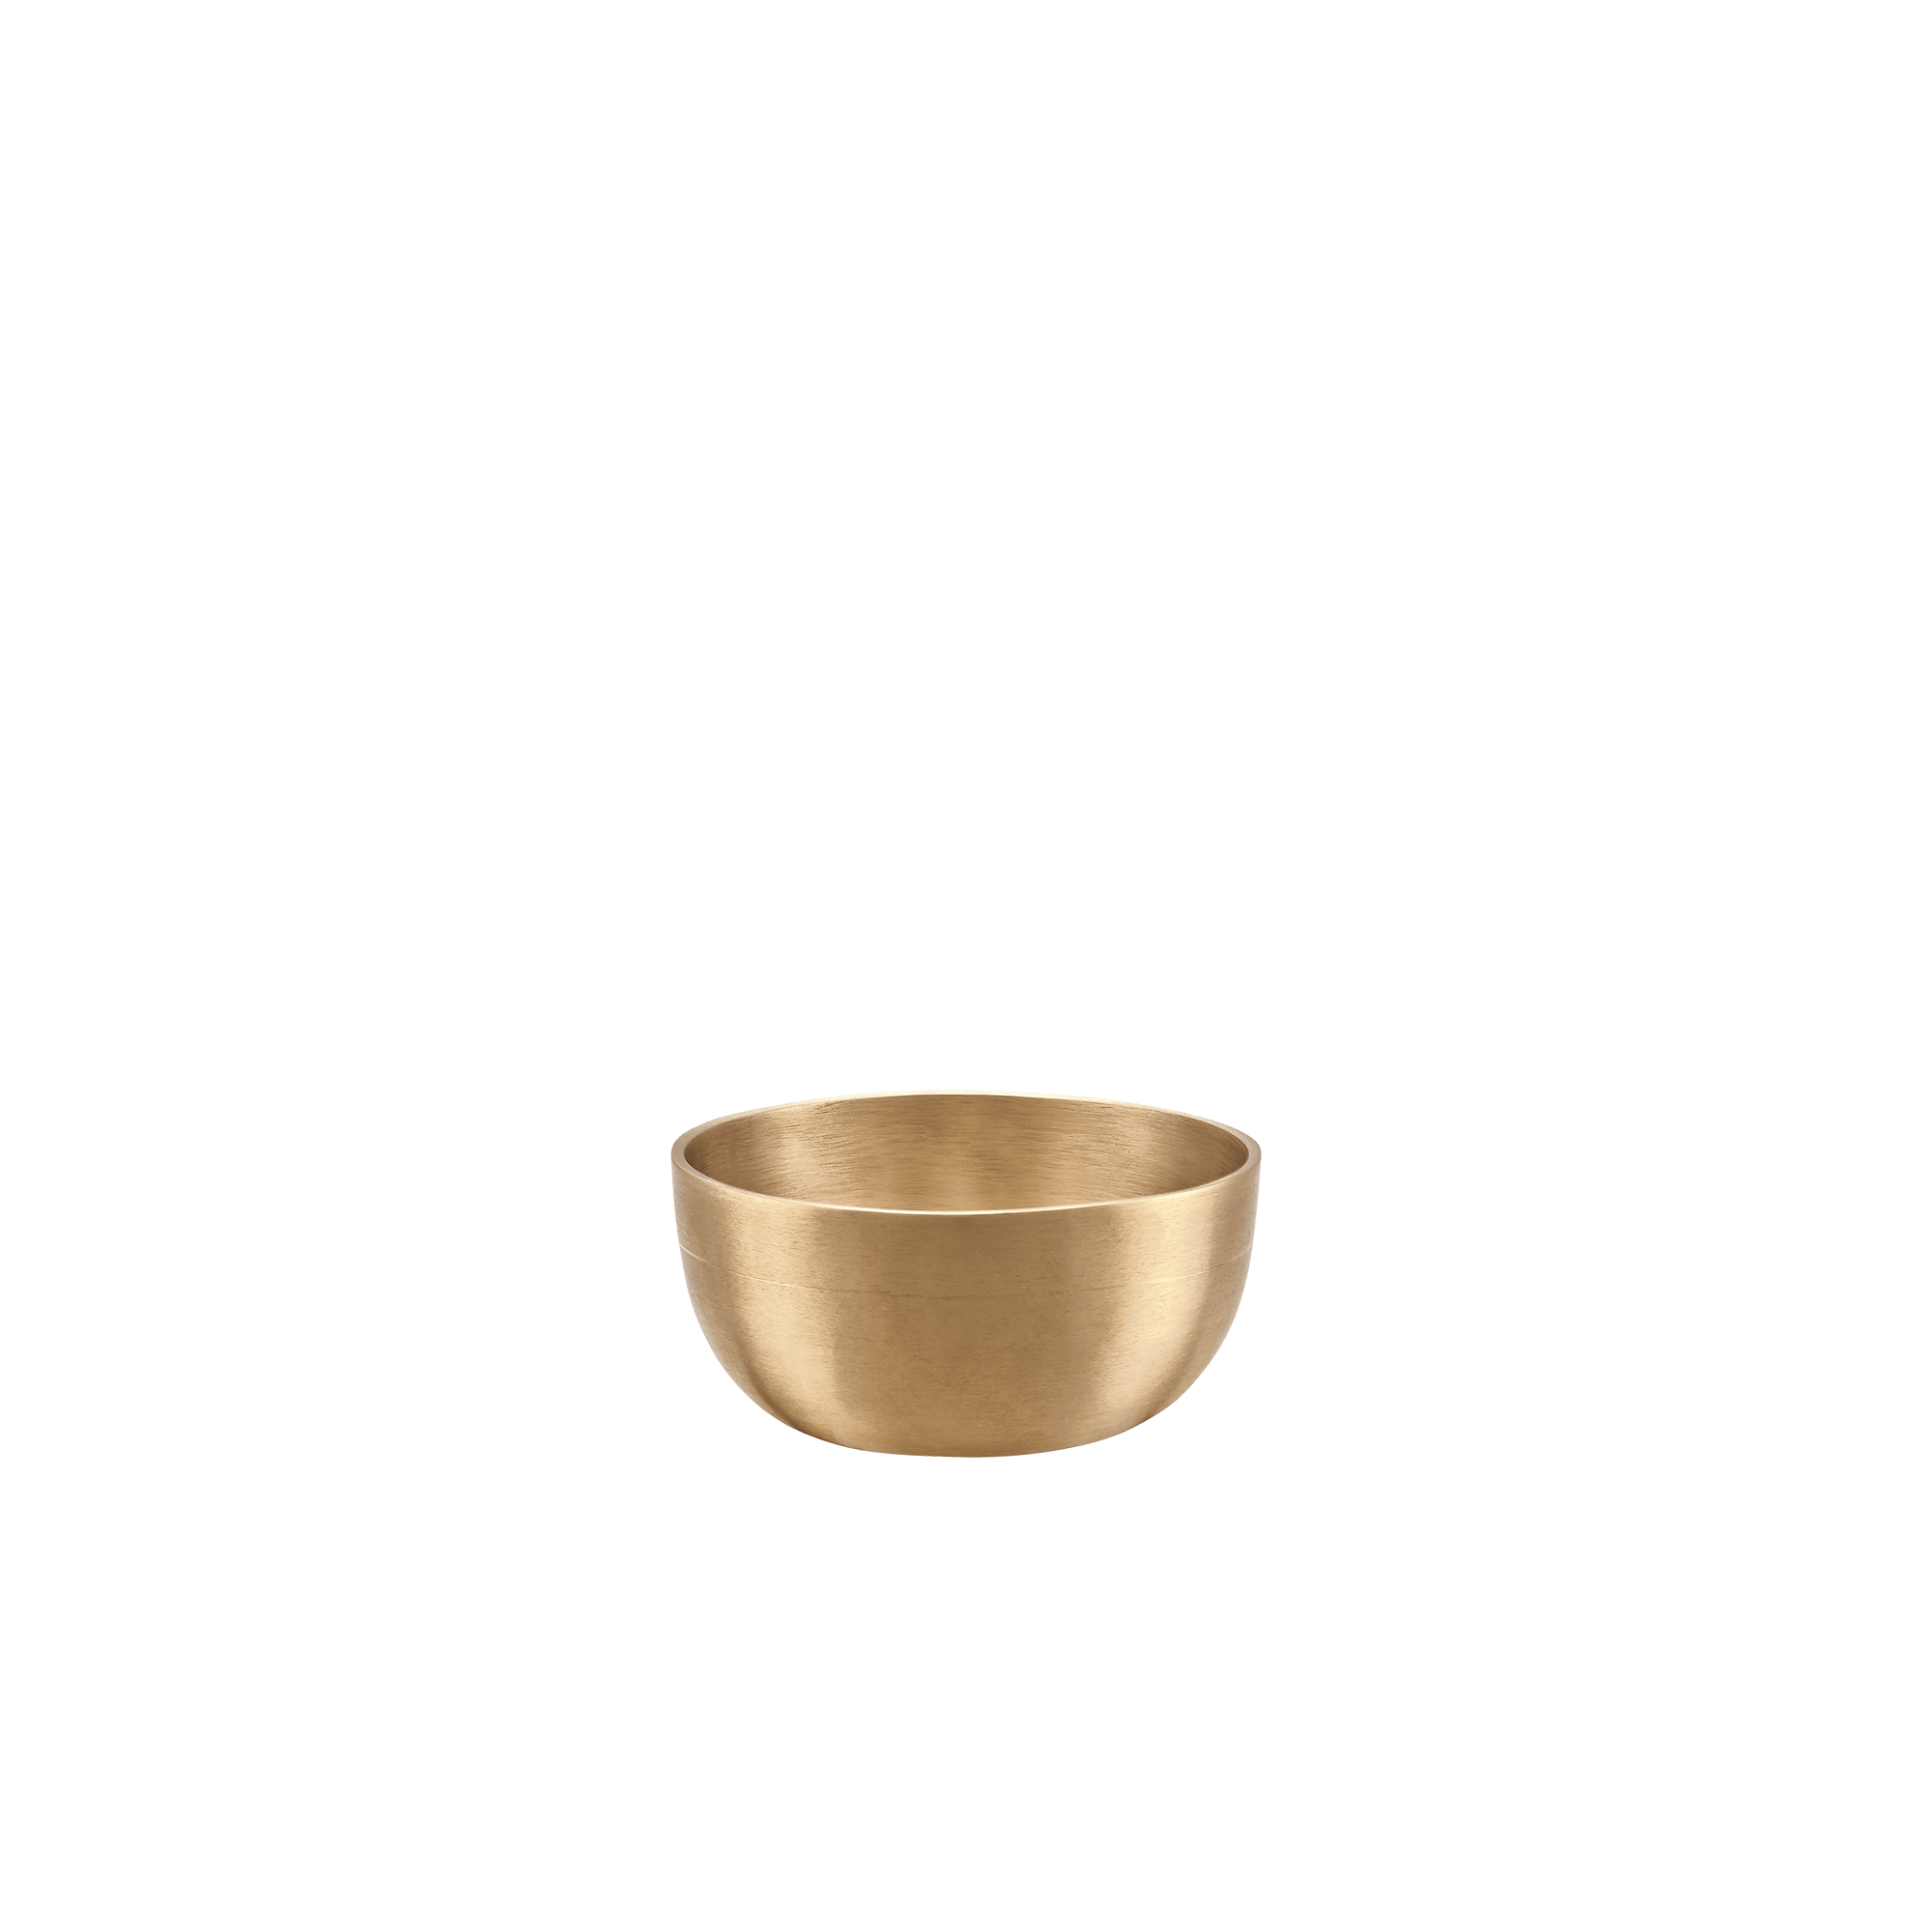 Cosmos Therapy Singing Bowl and Bell 3.7" / 250g - Cosmos Therapy Singing Bowl